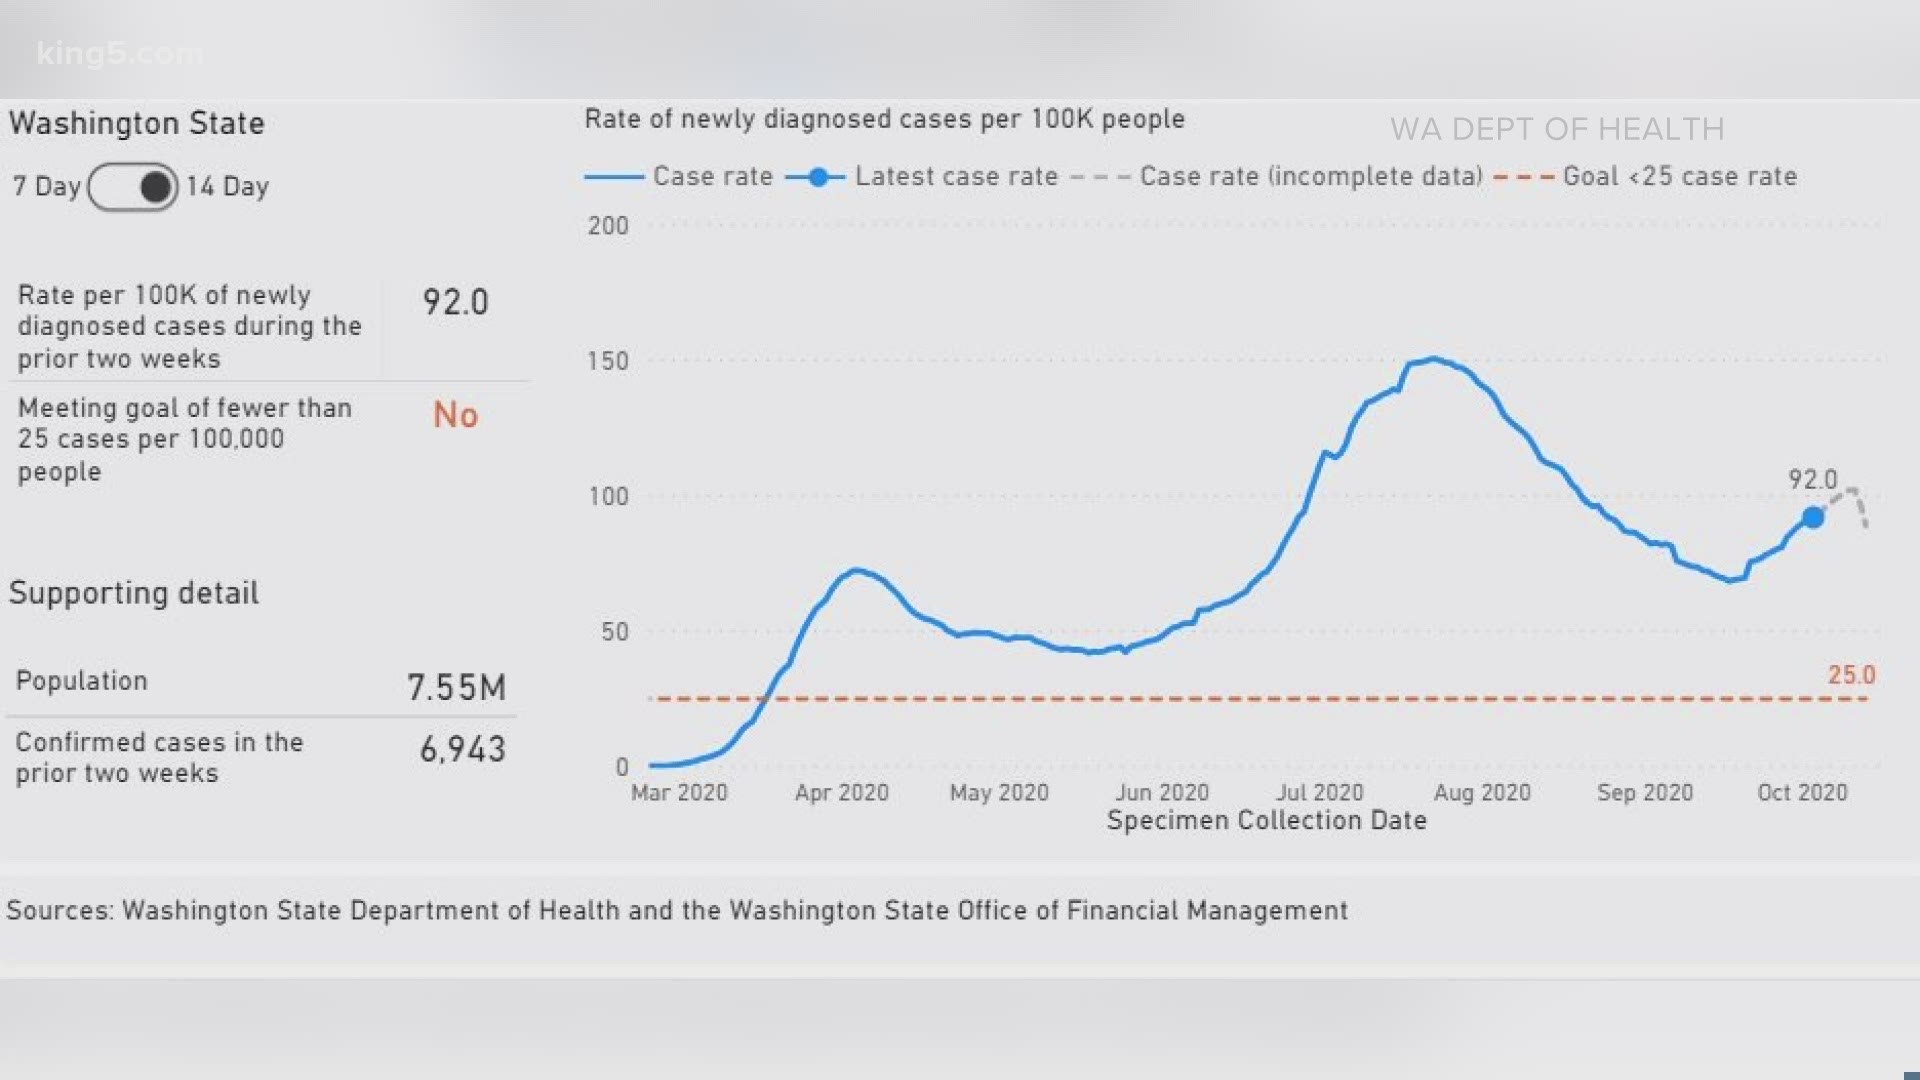 While COVID-19 cases are on the rise in western Washington, possibly due to fall weather, case counts seem to have plateaued in some areas of eastern Washington.